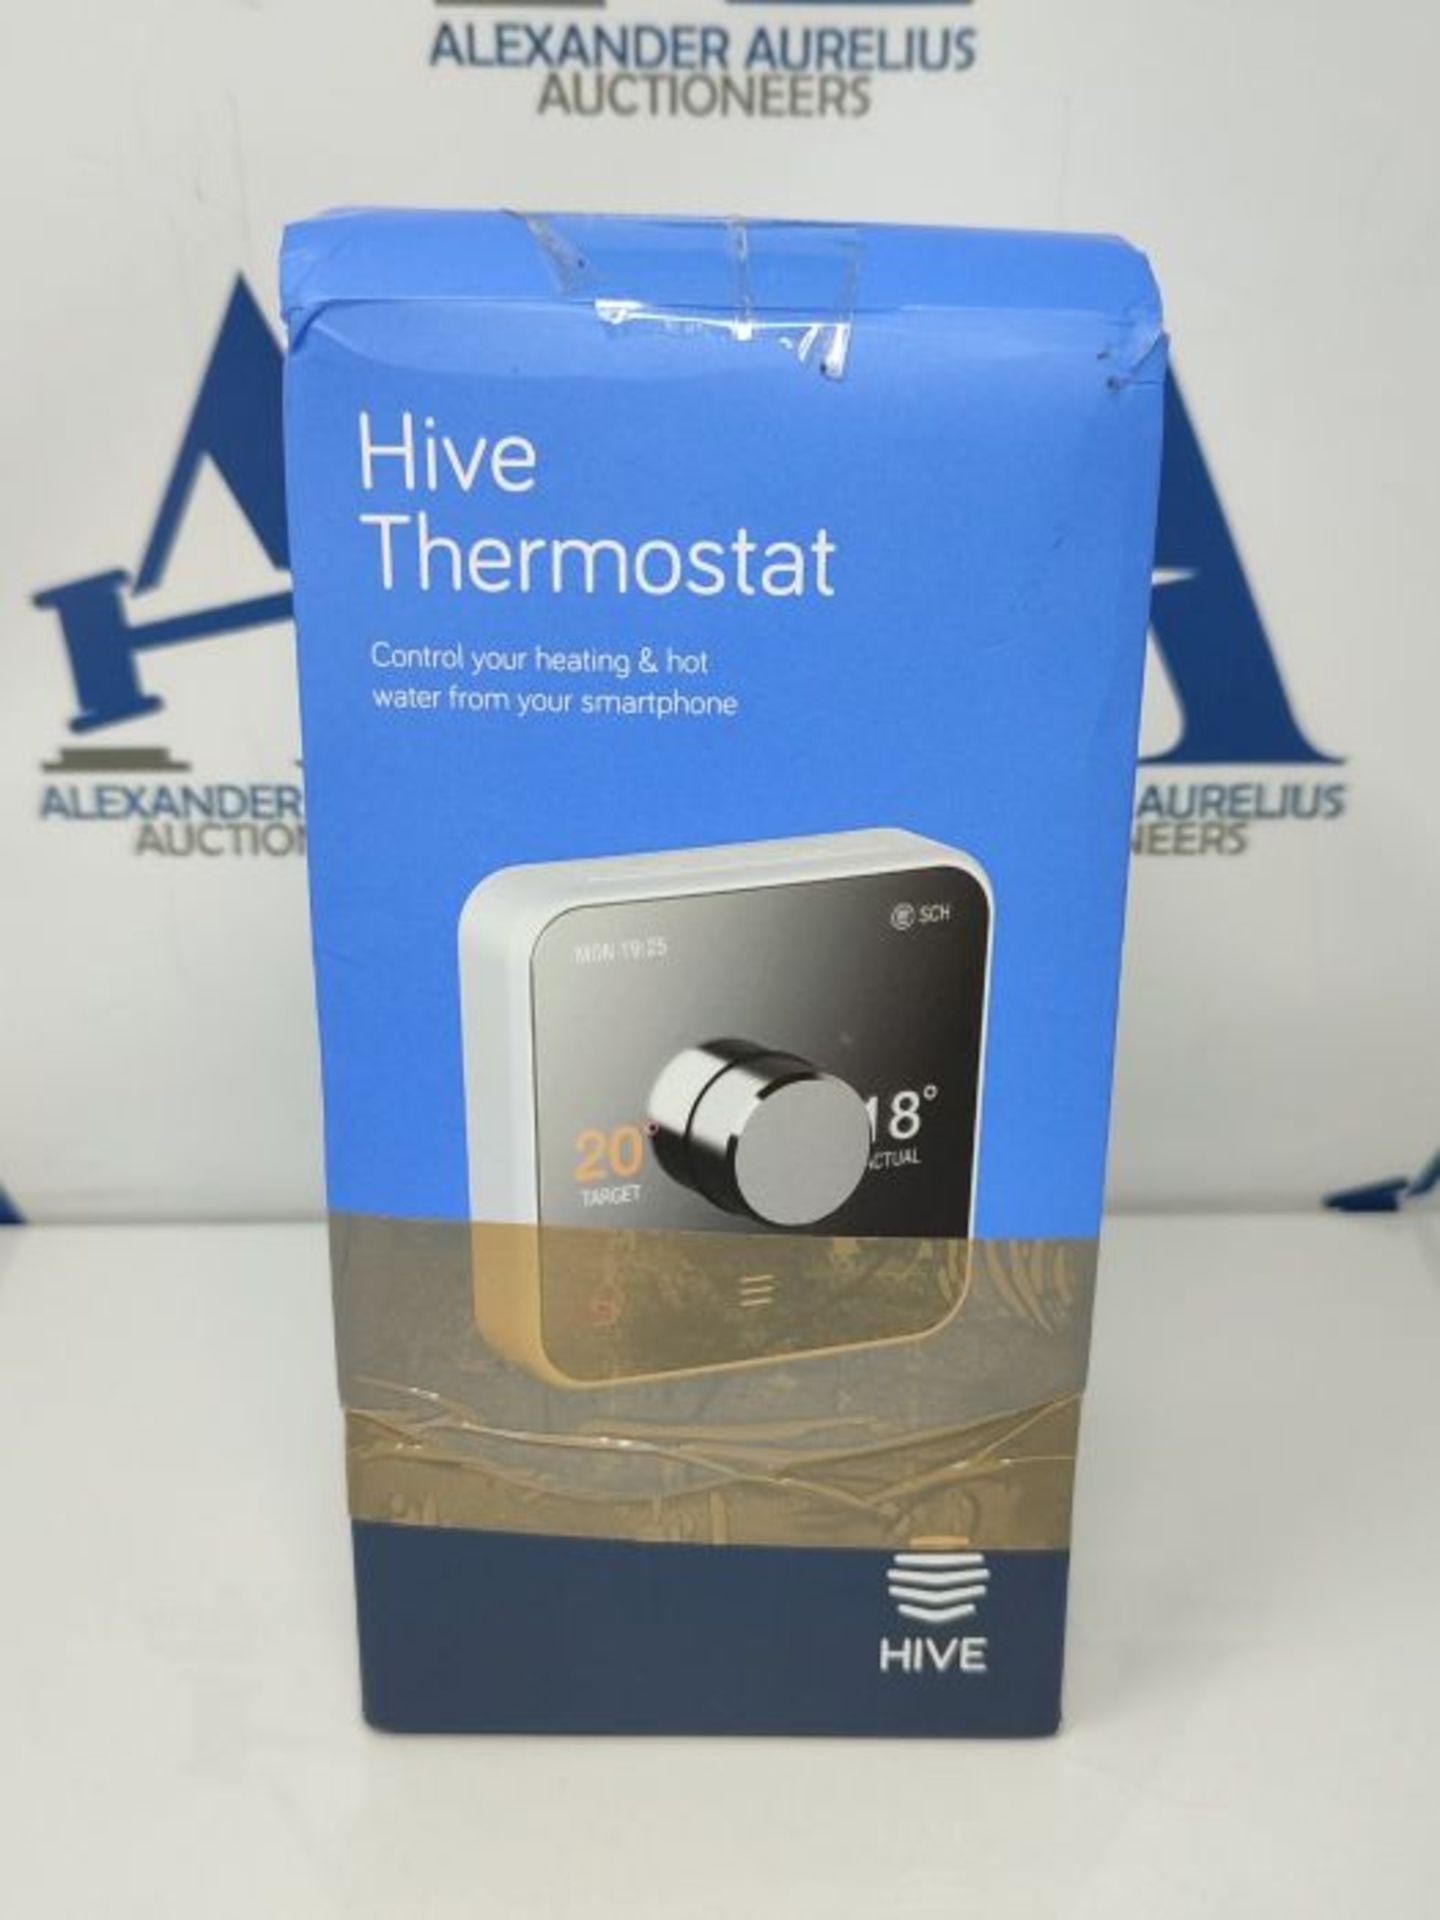 RRP £149.00 Hive Thermostat for Heating & Hot Water with Hive Hub - Energy Saving Thermostat - Image 2 of 3